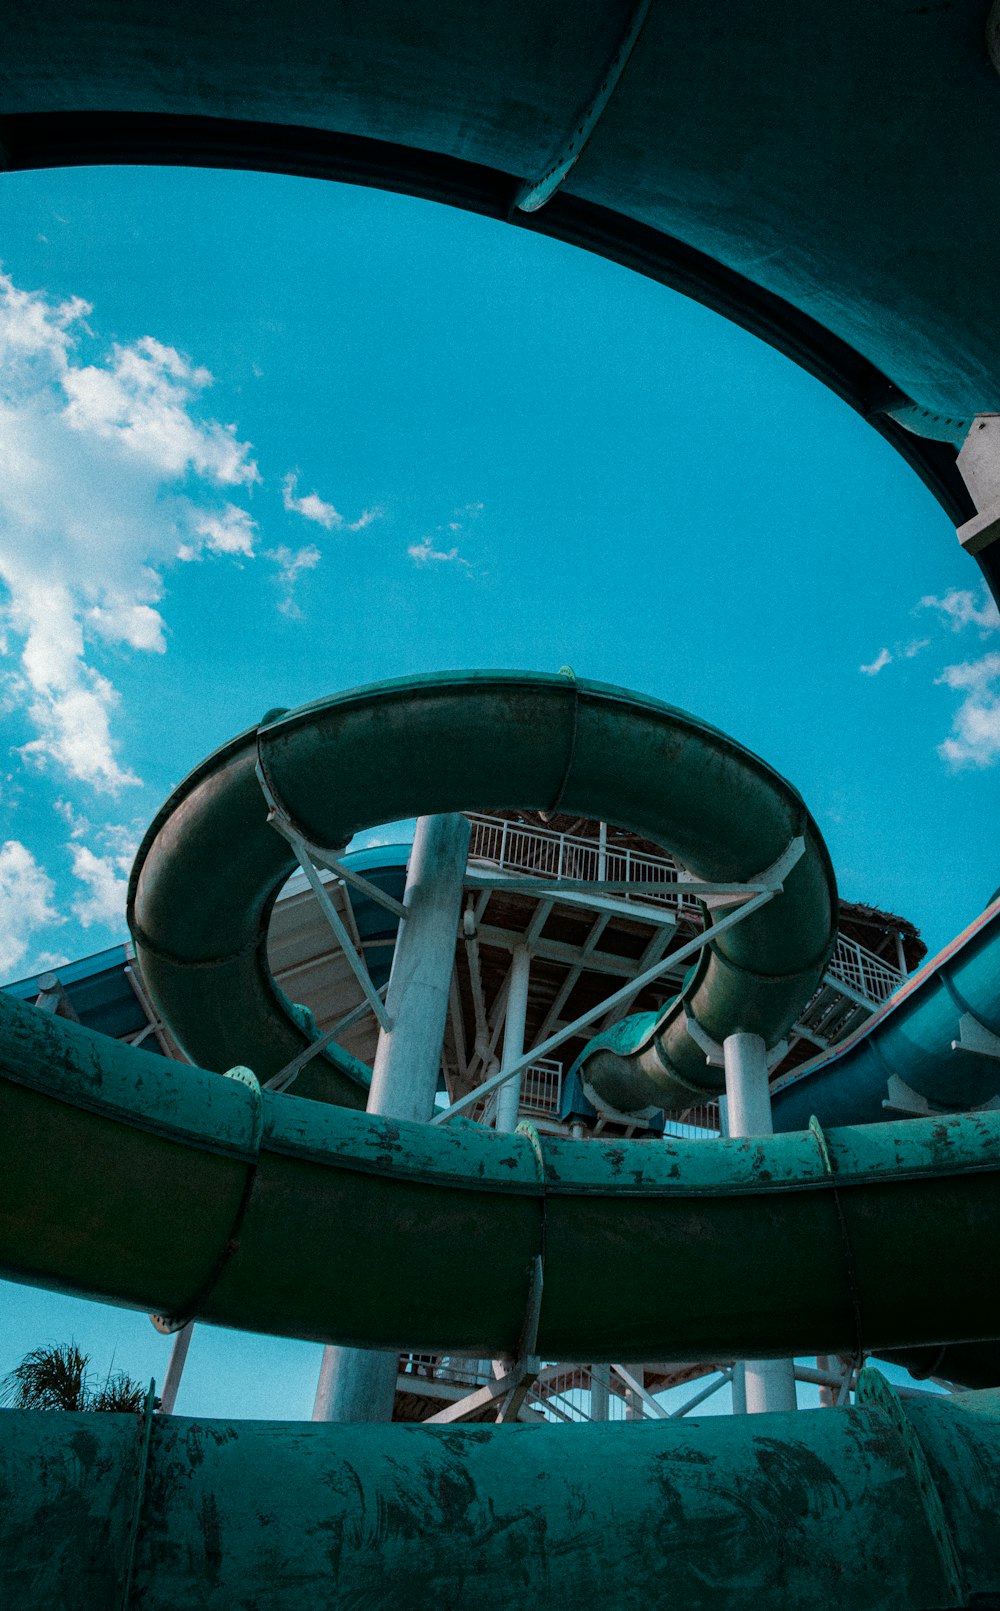 a view of a water slide from below